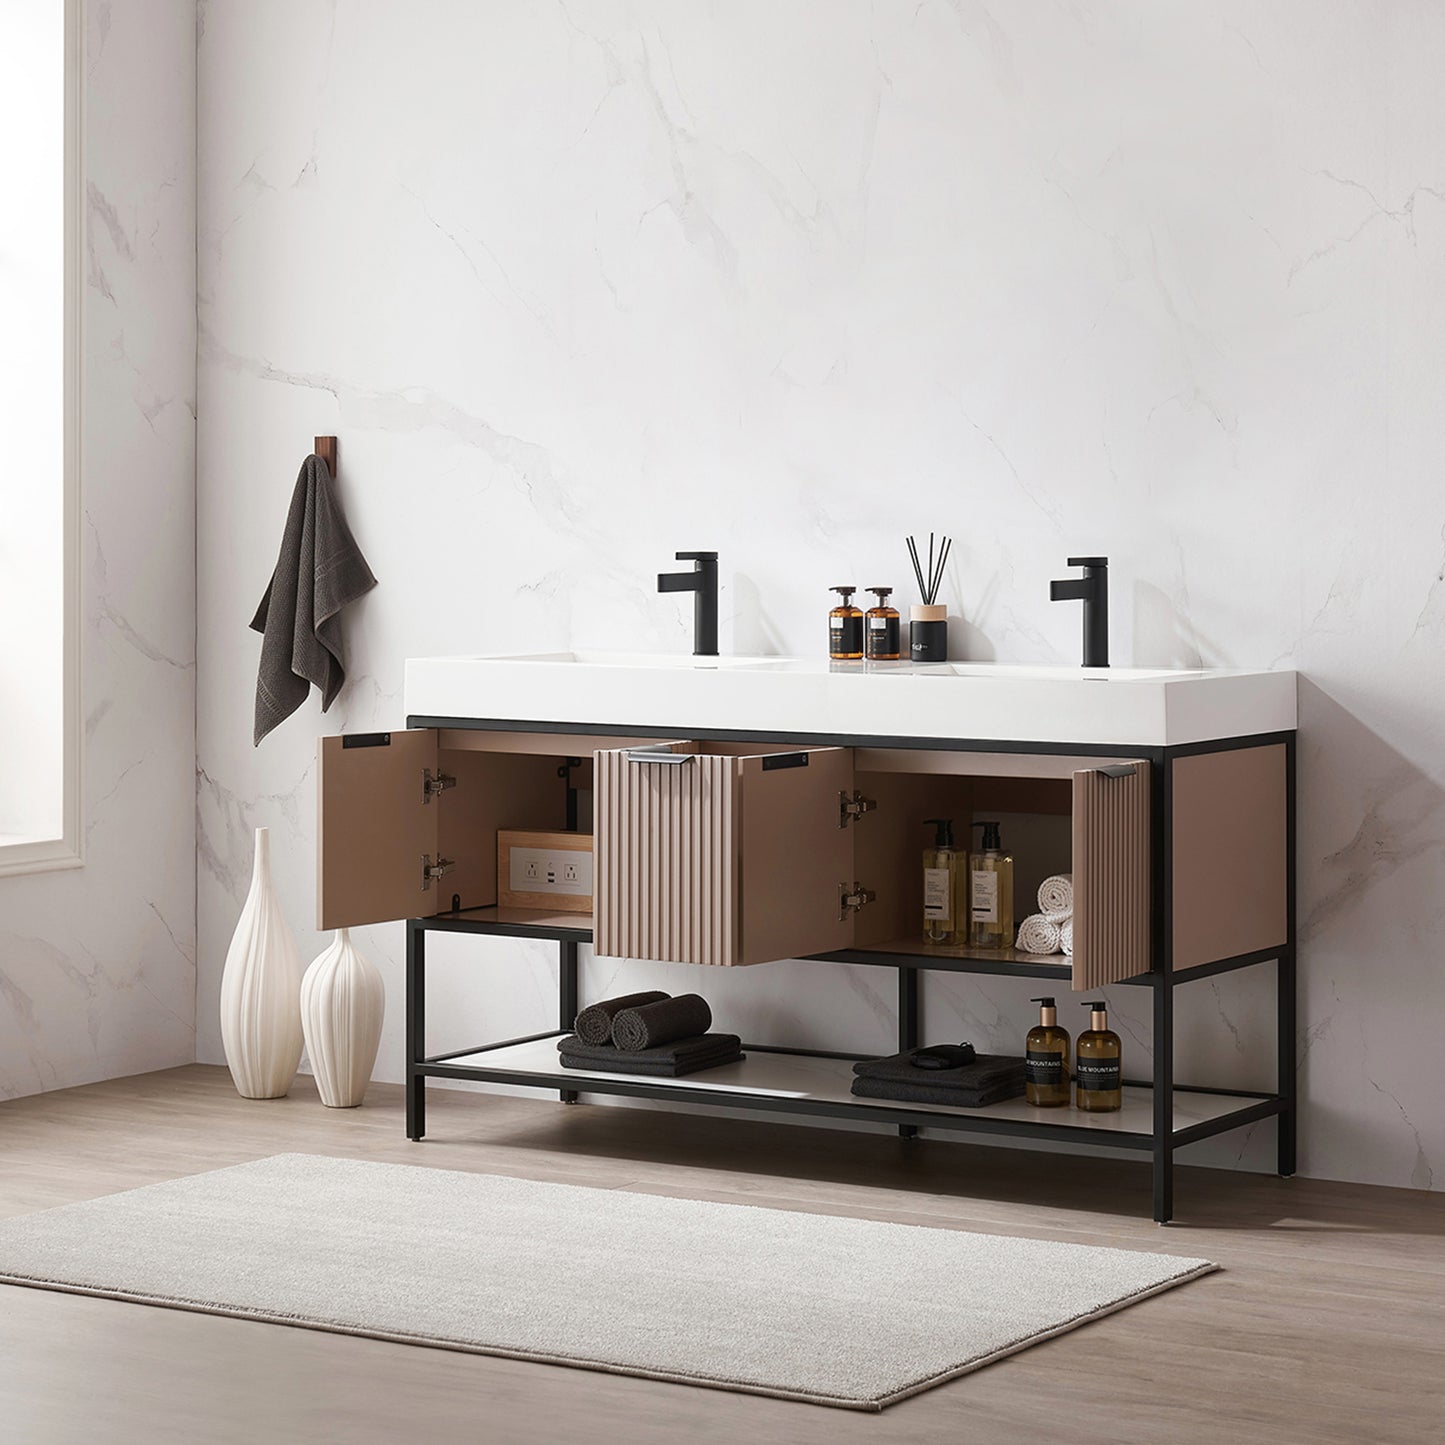 Marcilla 60" Double Sink Bath Vanity in Almond Coffee with One-Piece Composite Stone Sink Top